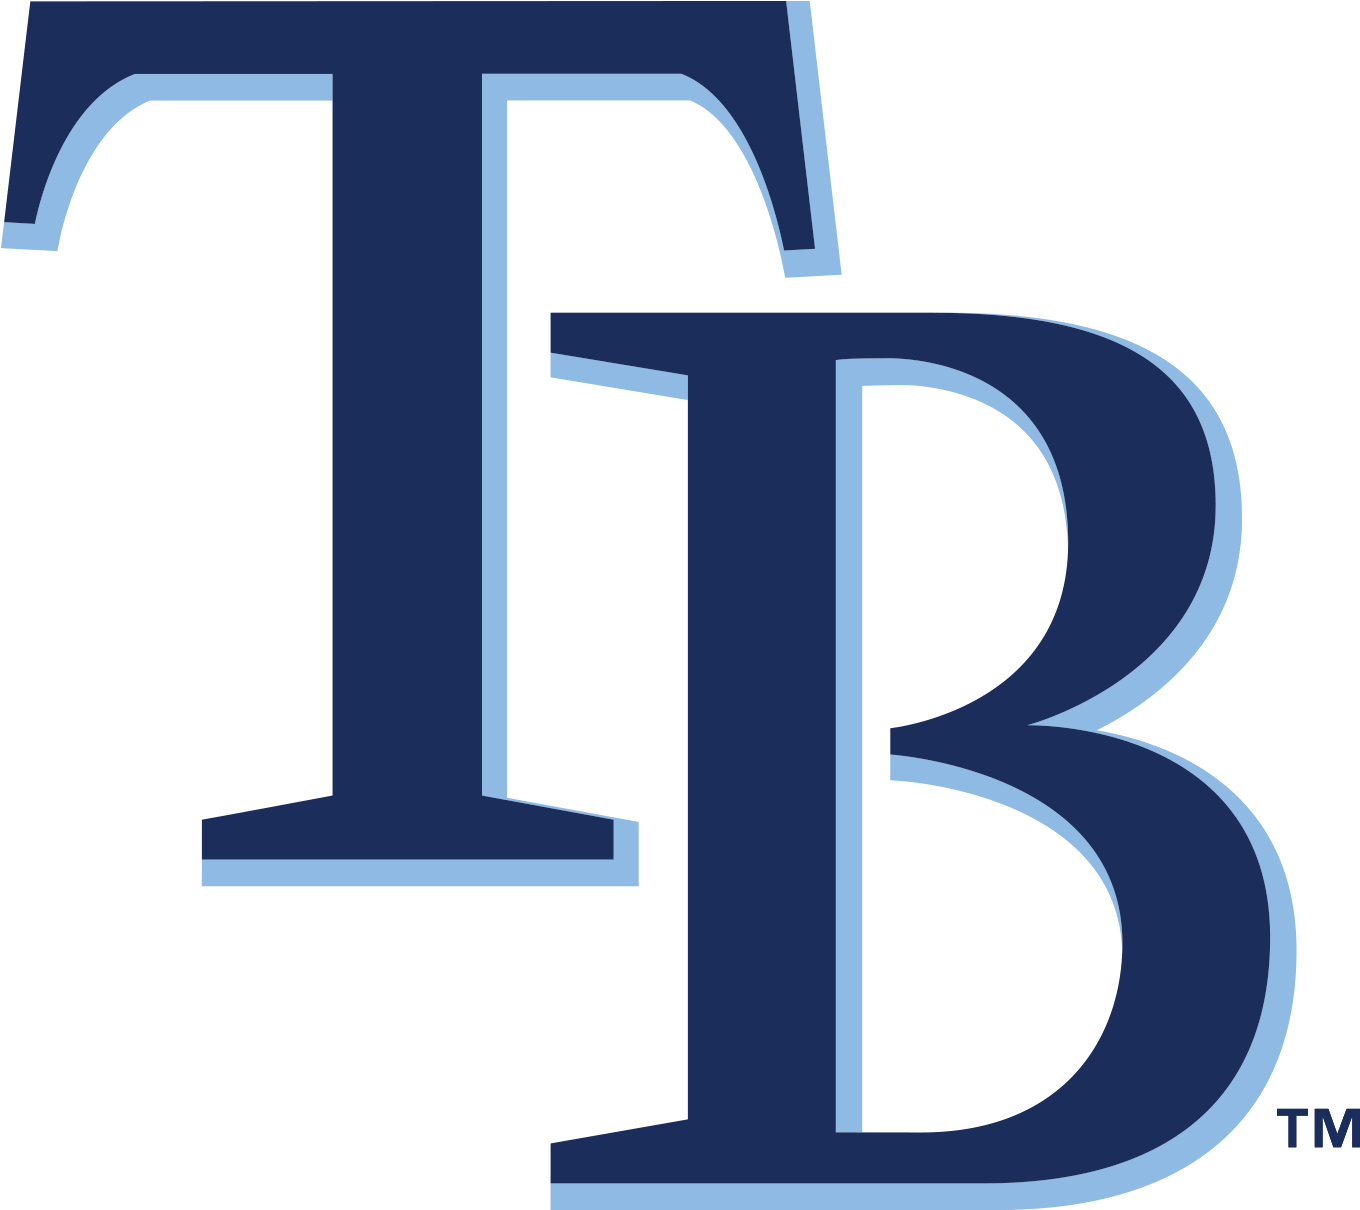 E40333c9 2d23 4673 Bfb0 D5a59f6ab716 - Tampa Bay Rays Logo (1400x1400)